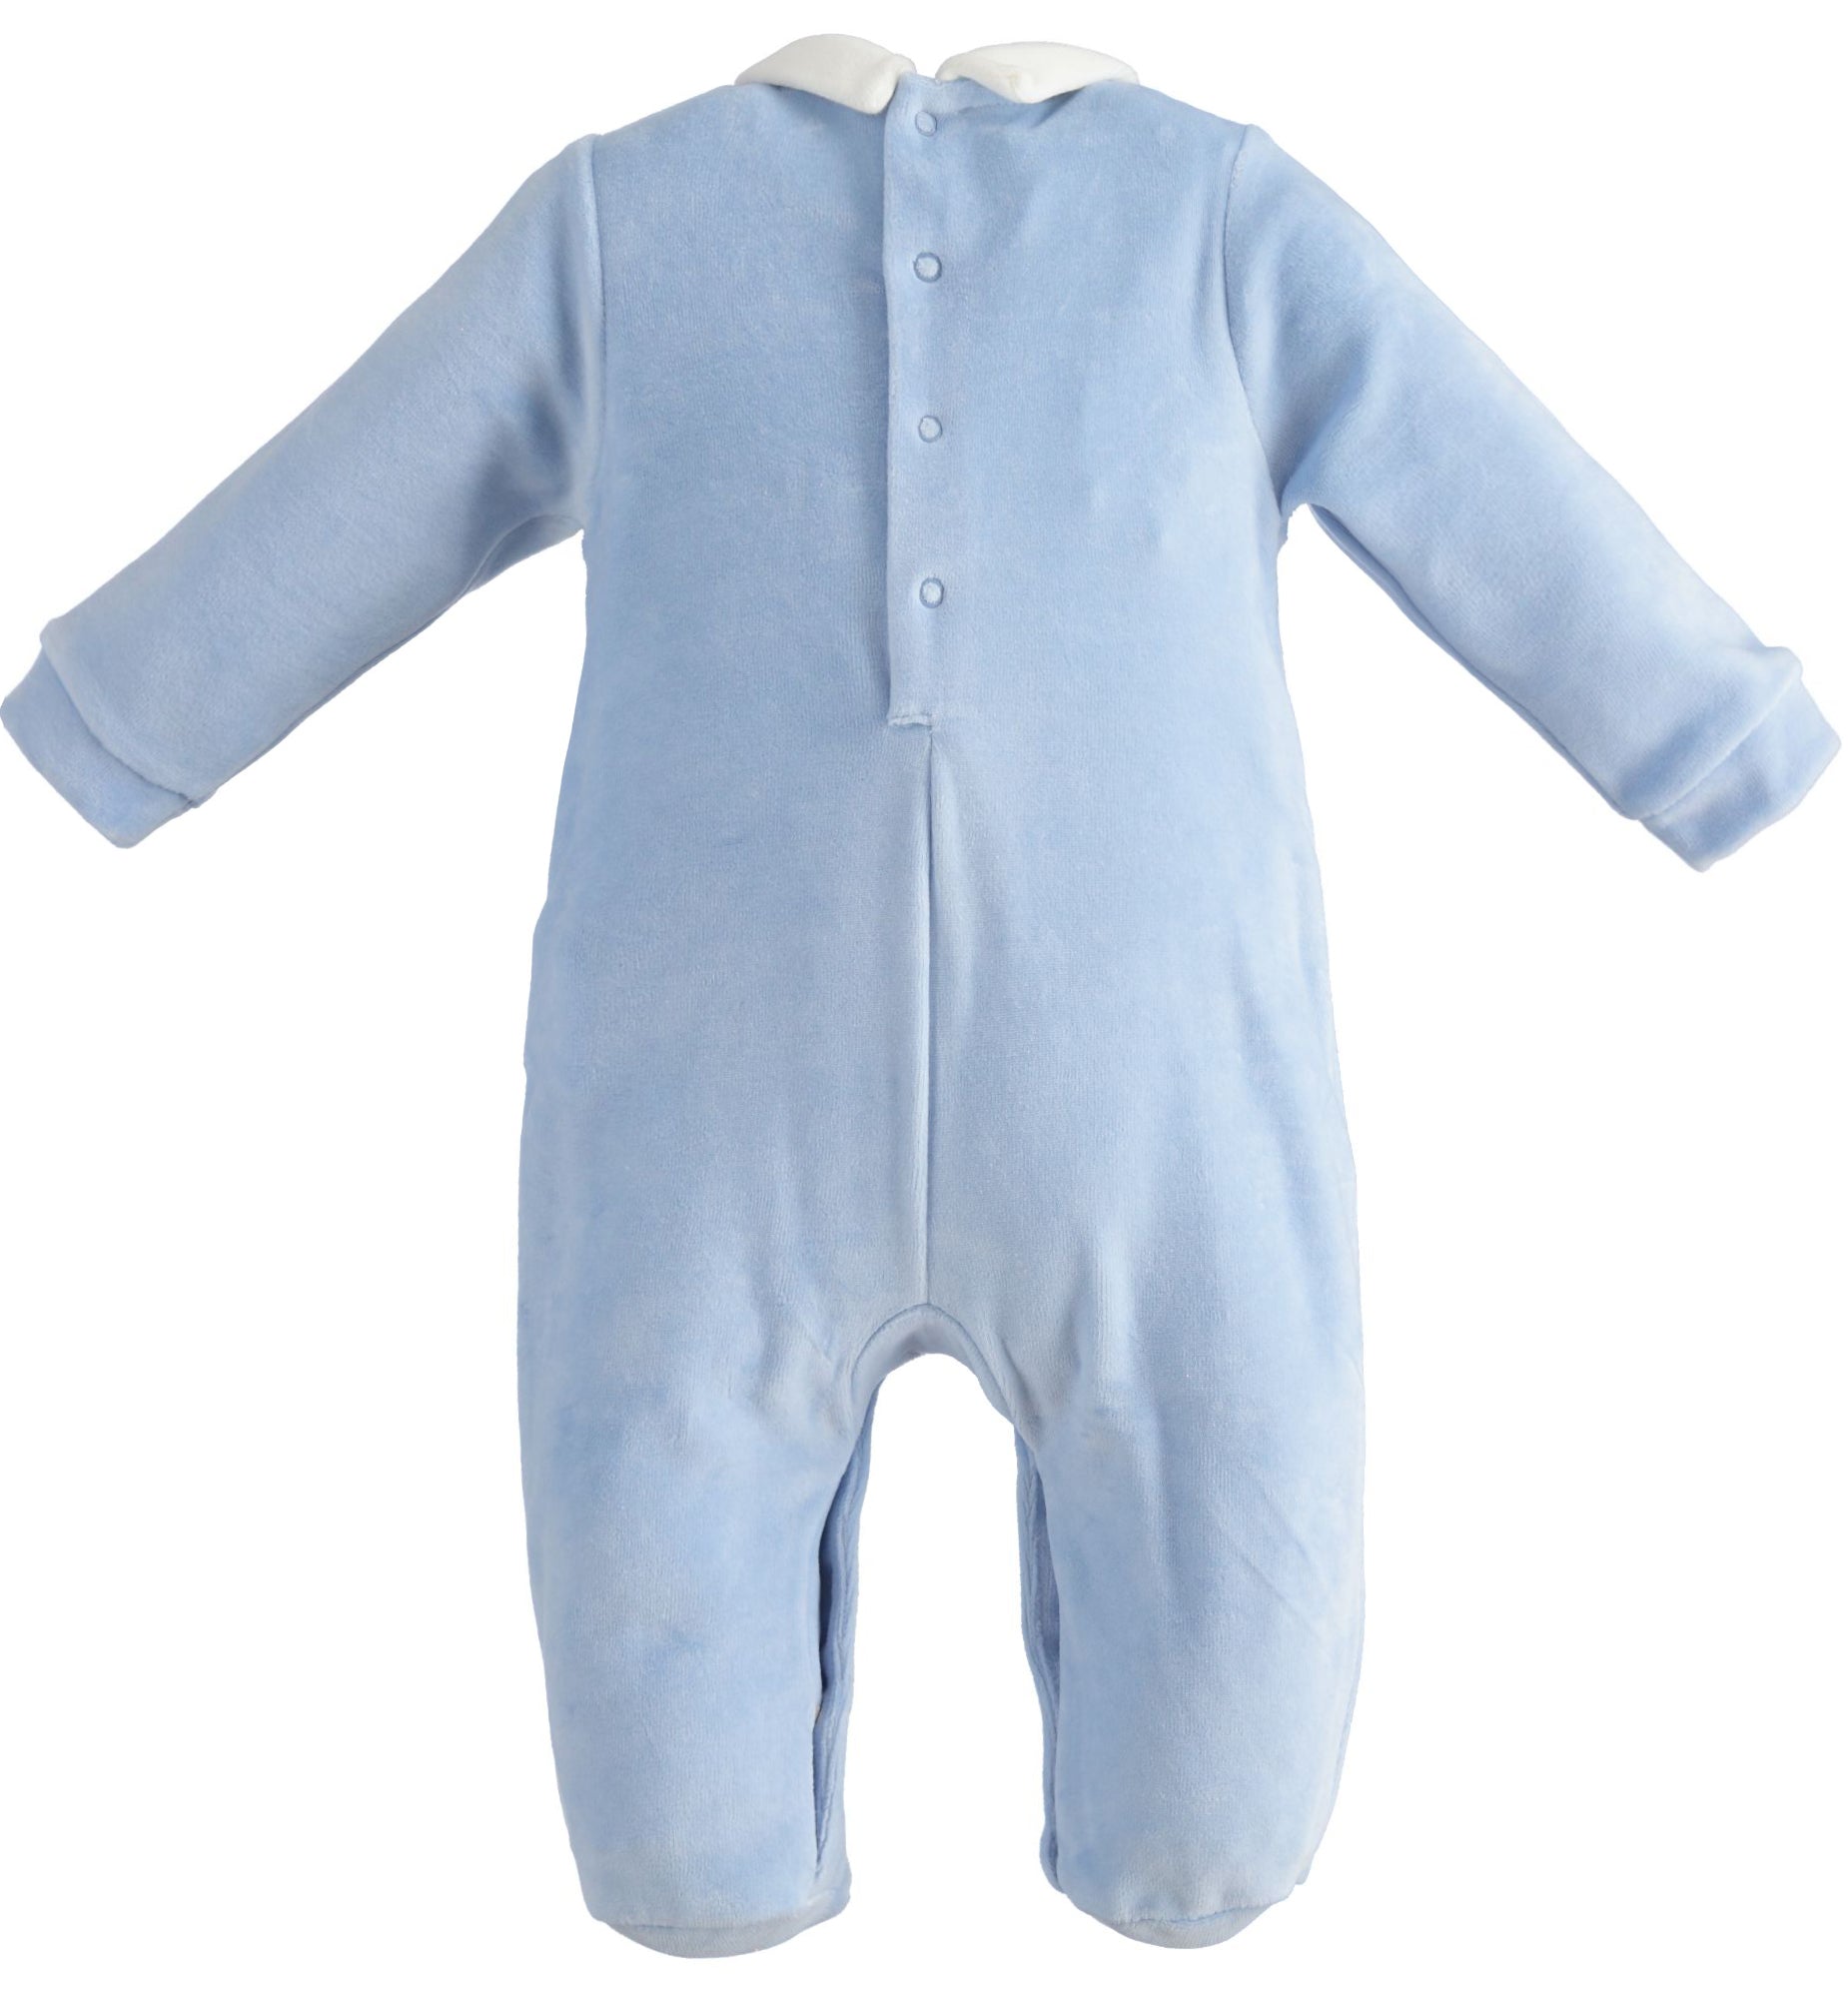 pure baby blue and white sleepsuit by minibanda